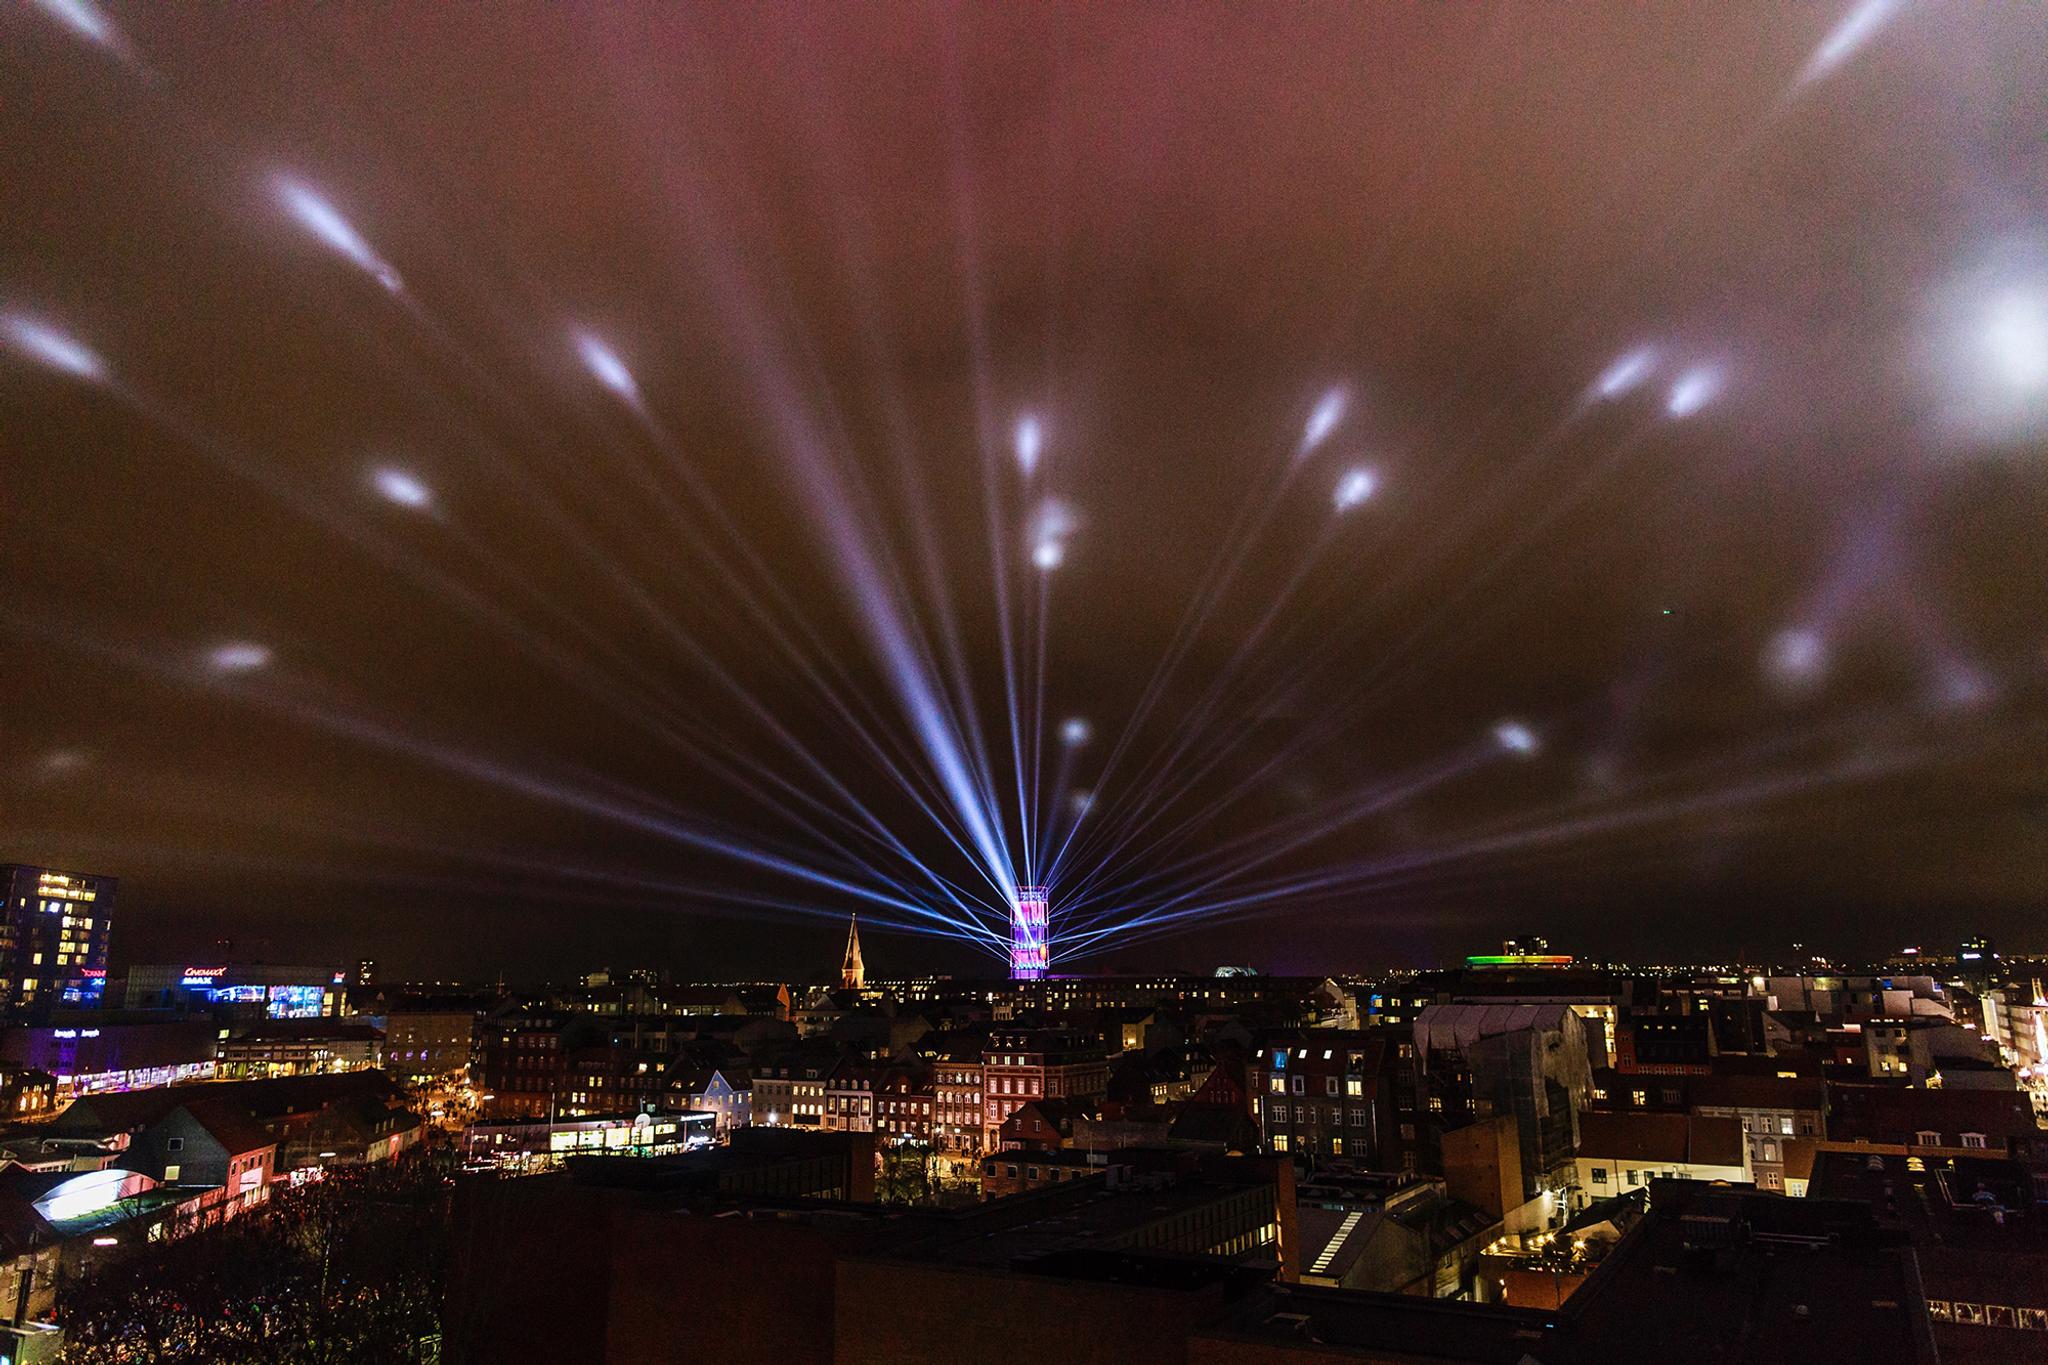 A broad view of Aarhus from above at night. in the center, a tower of light emits long reaching beams into the night sky, stretching all across the city.